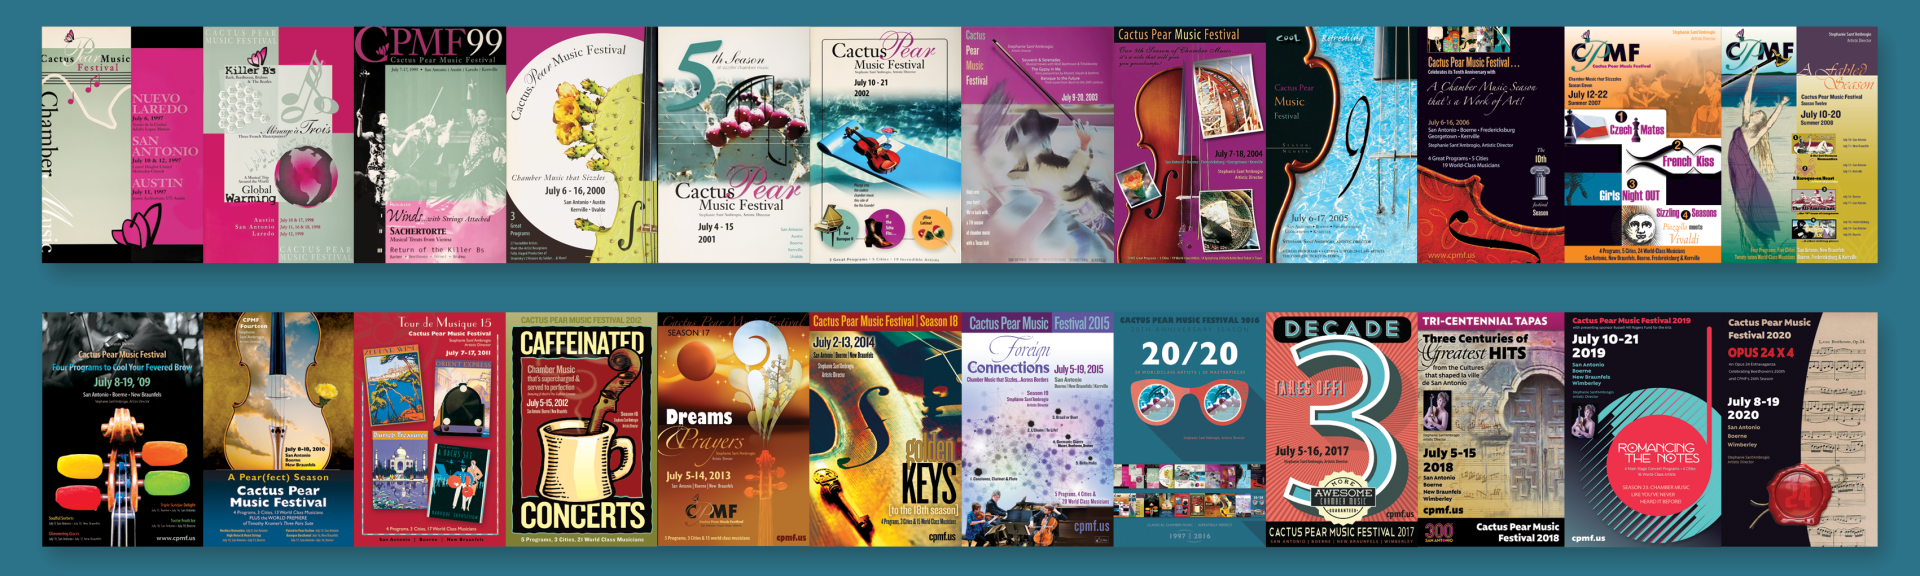 First 20 years of CPMF brochure art